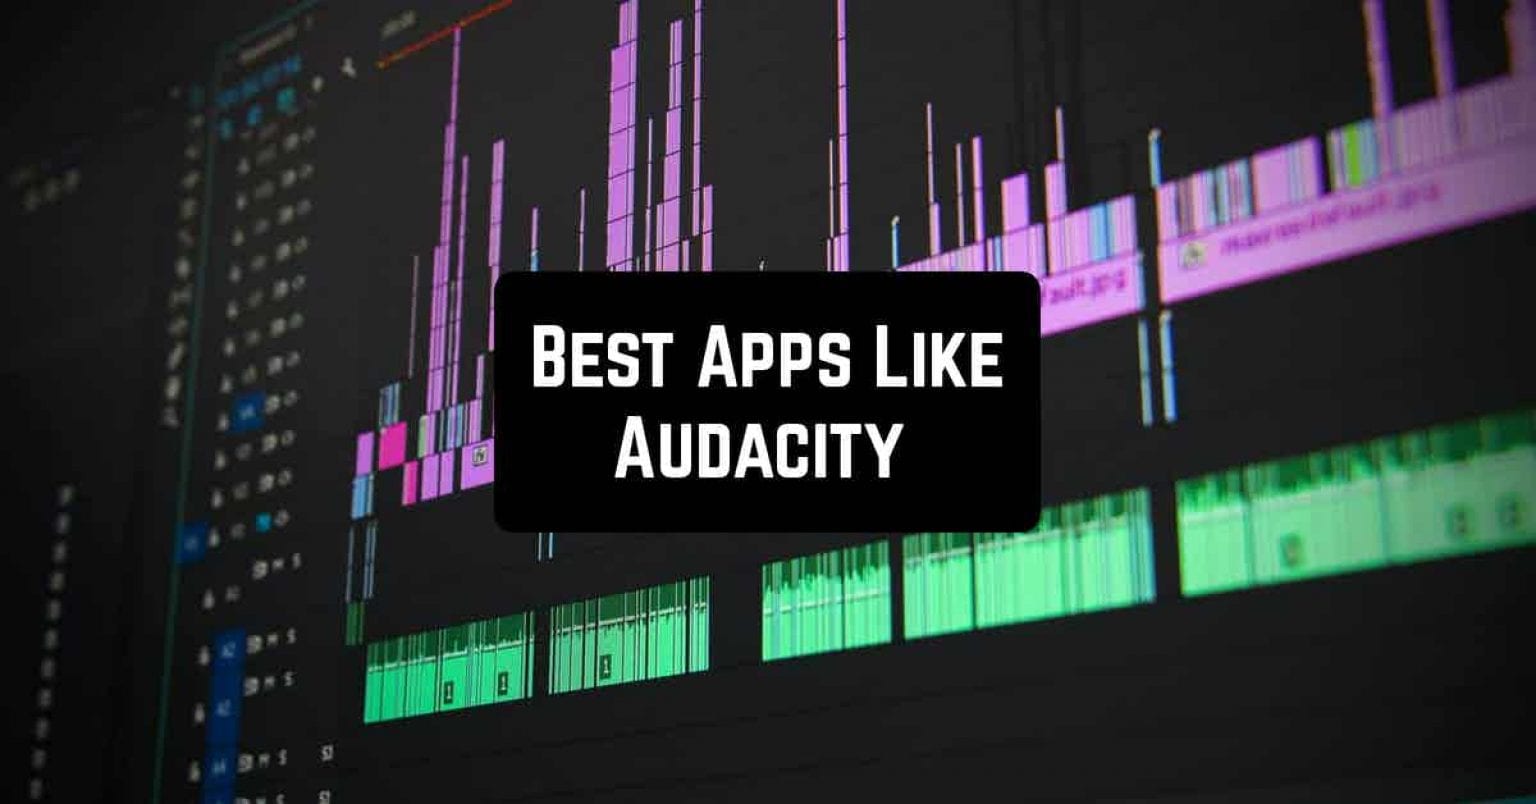 audacity software for mobile